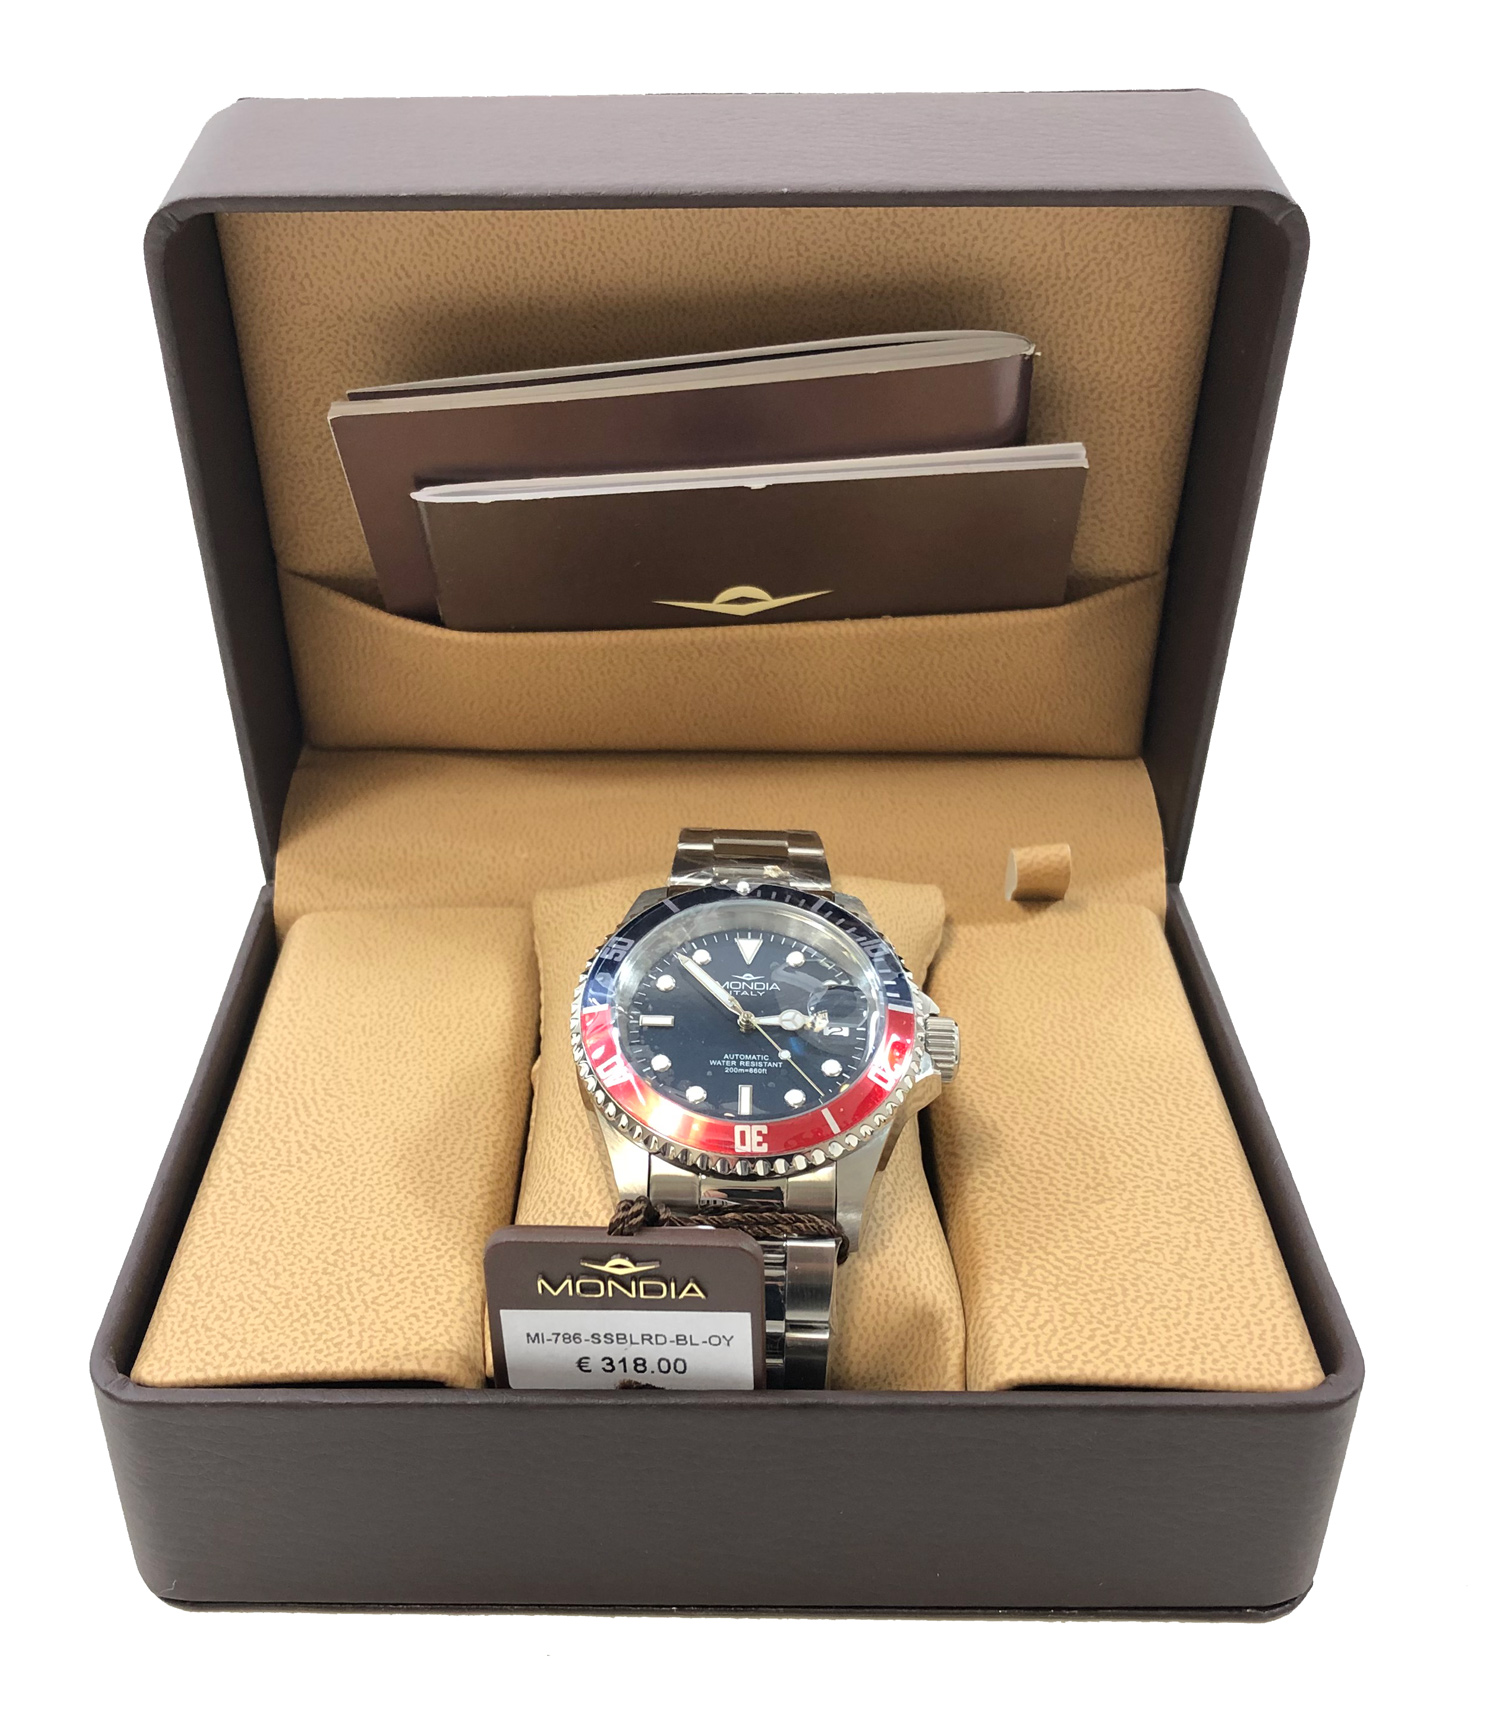 Mondia Italy Watch Gent Madison Urban Automatic Blue&Red 42mm MI-786-SSBLRD-BL-OY - Click Image to Close